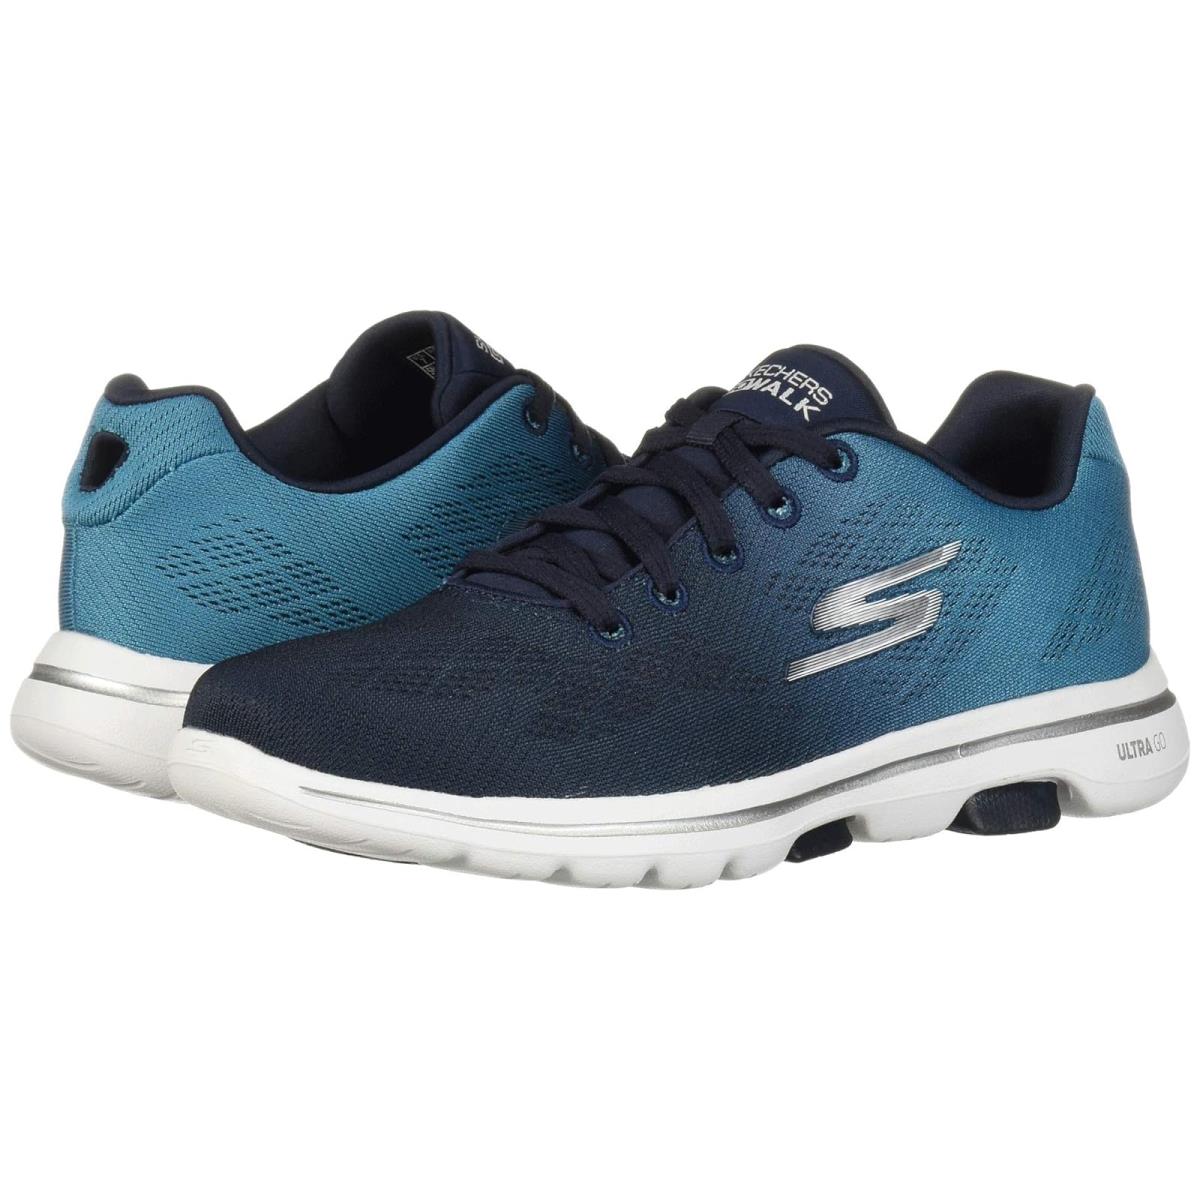 Woman`s Sneakers Athletic Shoes Skechers Performance Go Walk 5 - Alive Navy/White